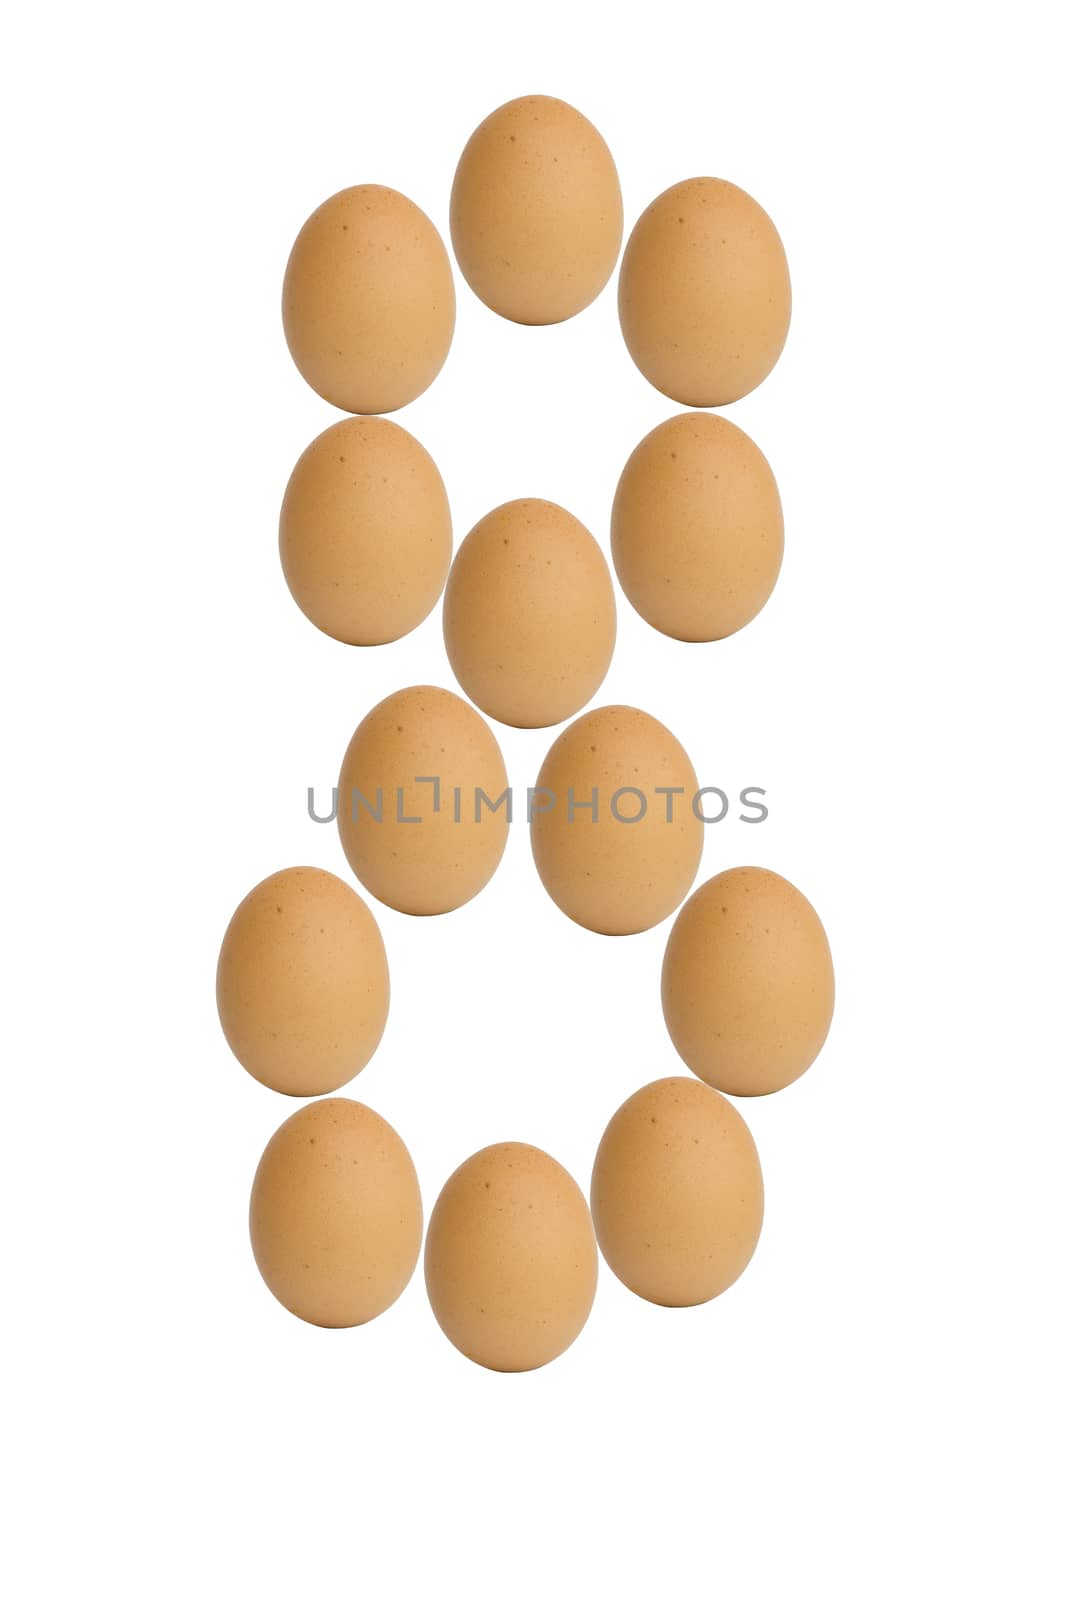 Number 0 to 9 from brown eggs alphabet isolated on white background, eight